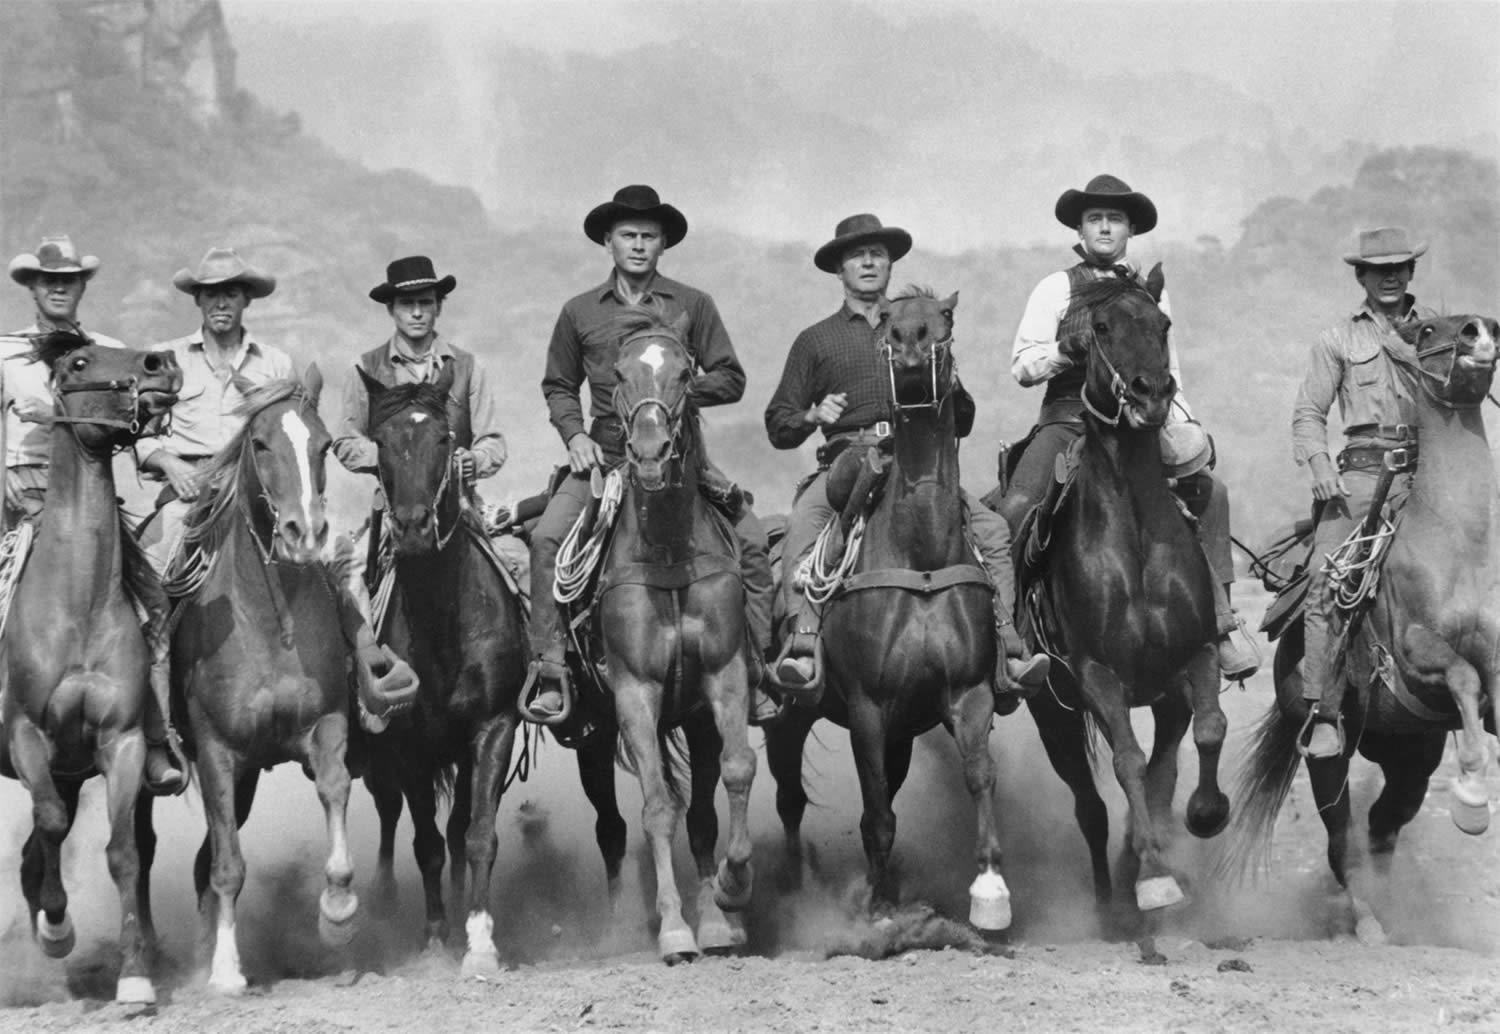 “The Magnificent Seven” (1960) inspired the hateful eight